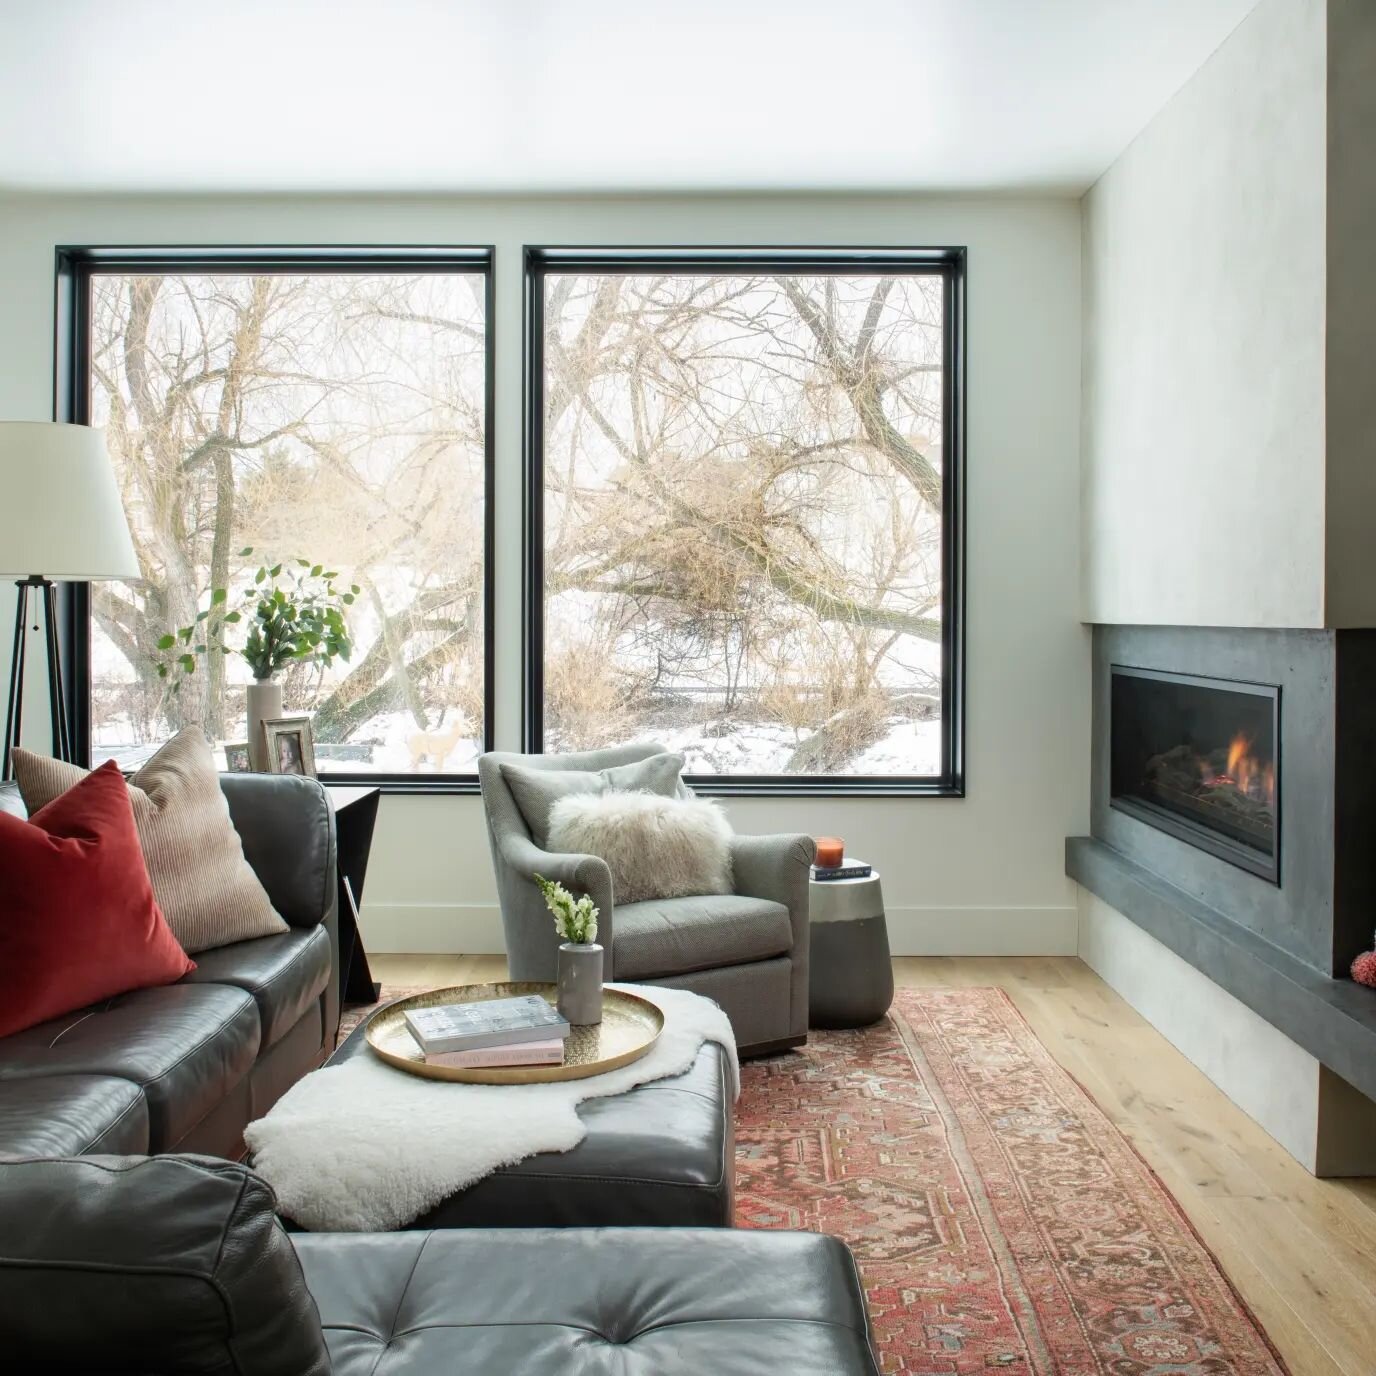 As another spring snowstorm hits, here are some cozy fireplace pictures to help you warm up.  Some warmth brought to you by @plumdl 

#fireplace #fresharchitecture #mtarchitect #utarchitect #utaharchitect #montanaarchitects